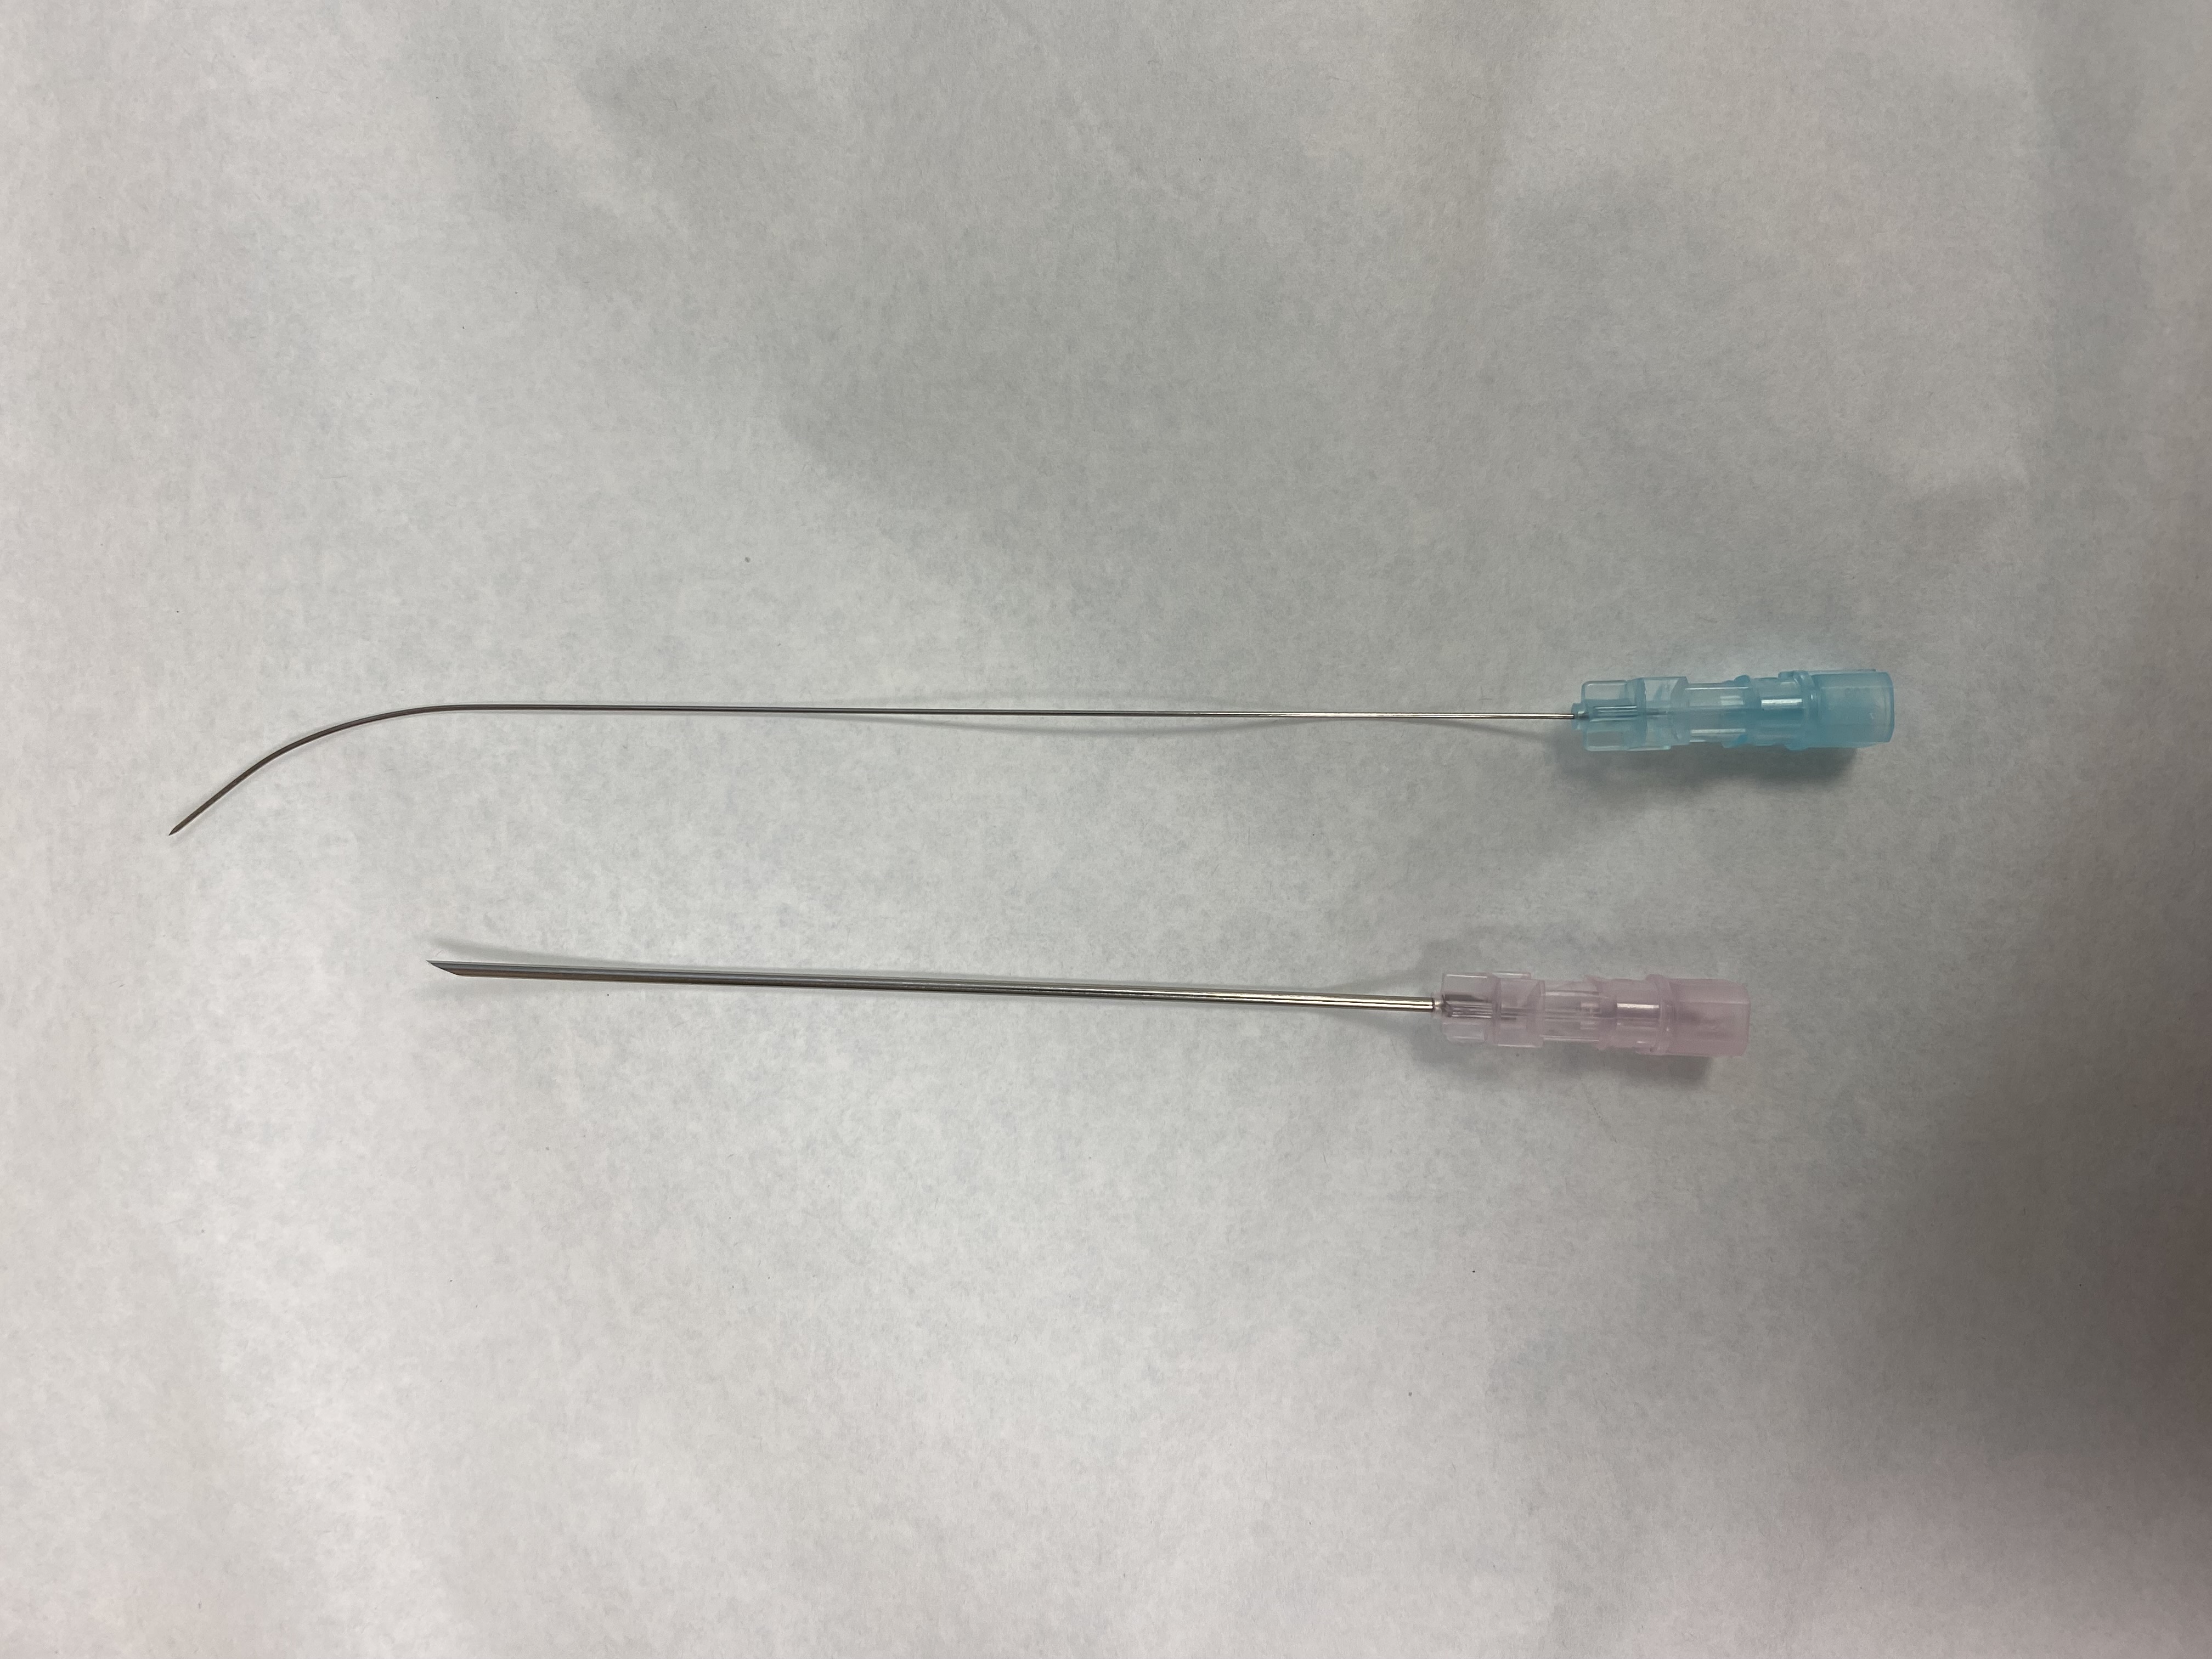 Initial setup for needle-over needle technique for difficult L5/S1 entry